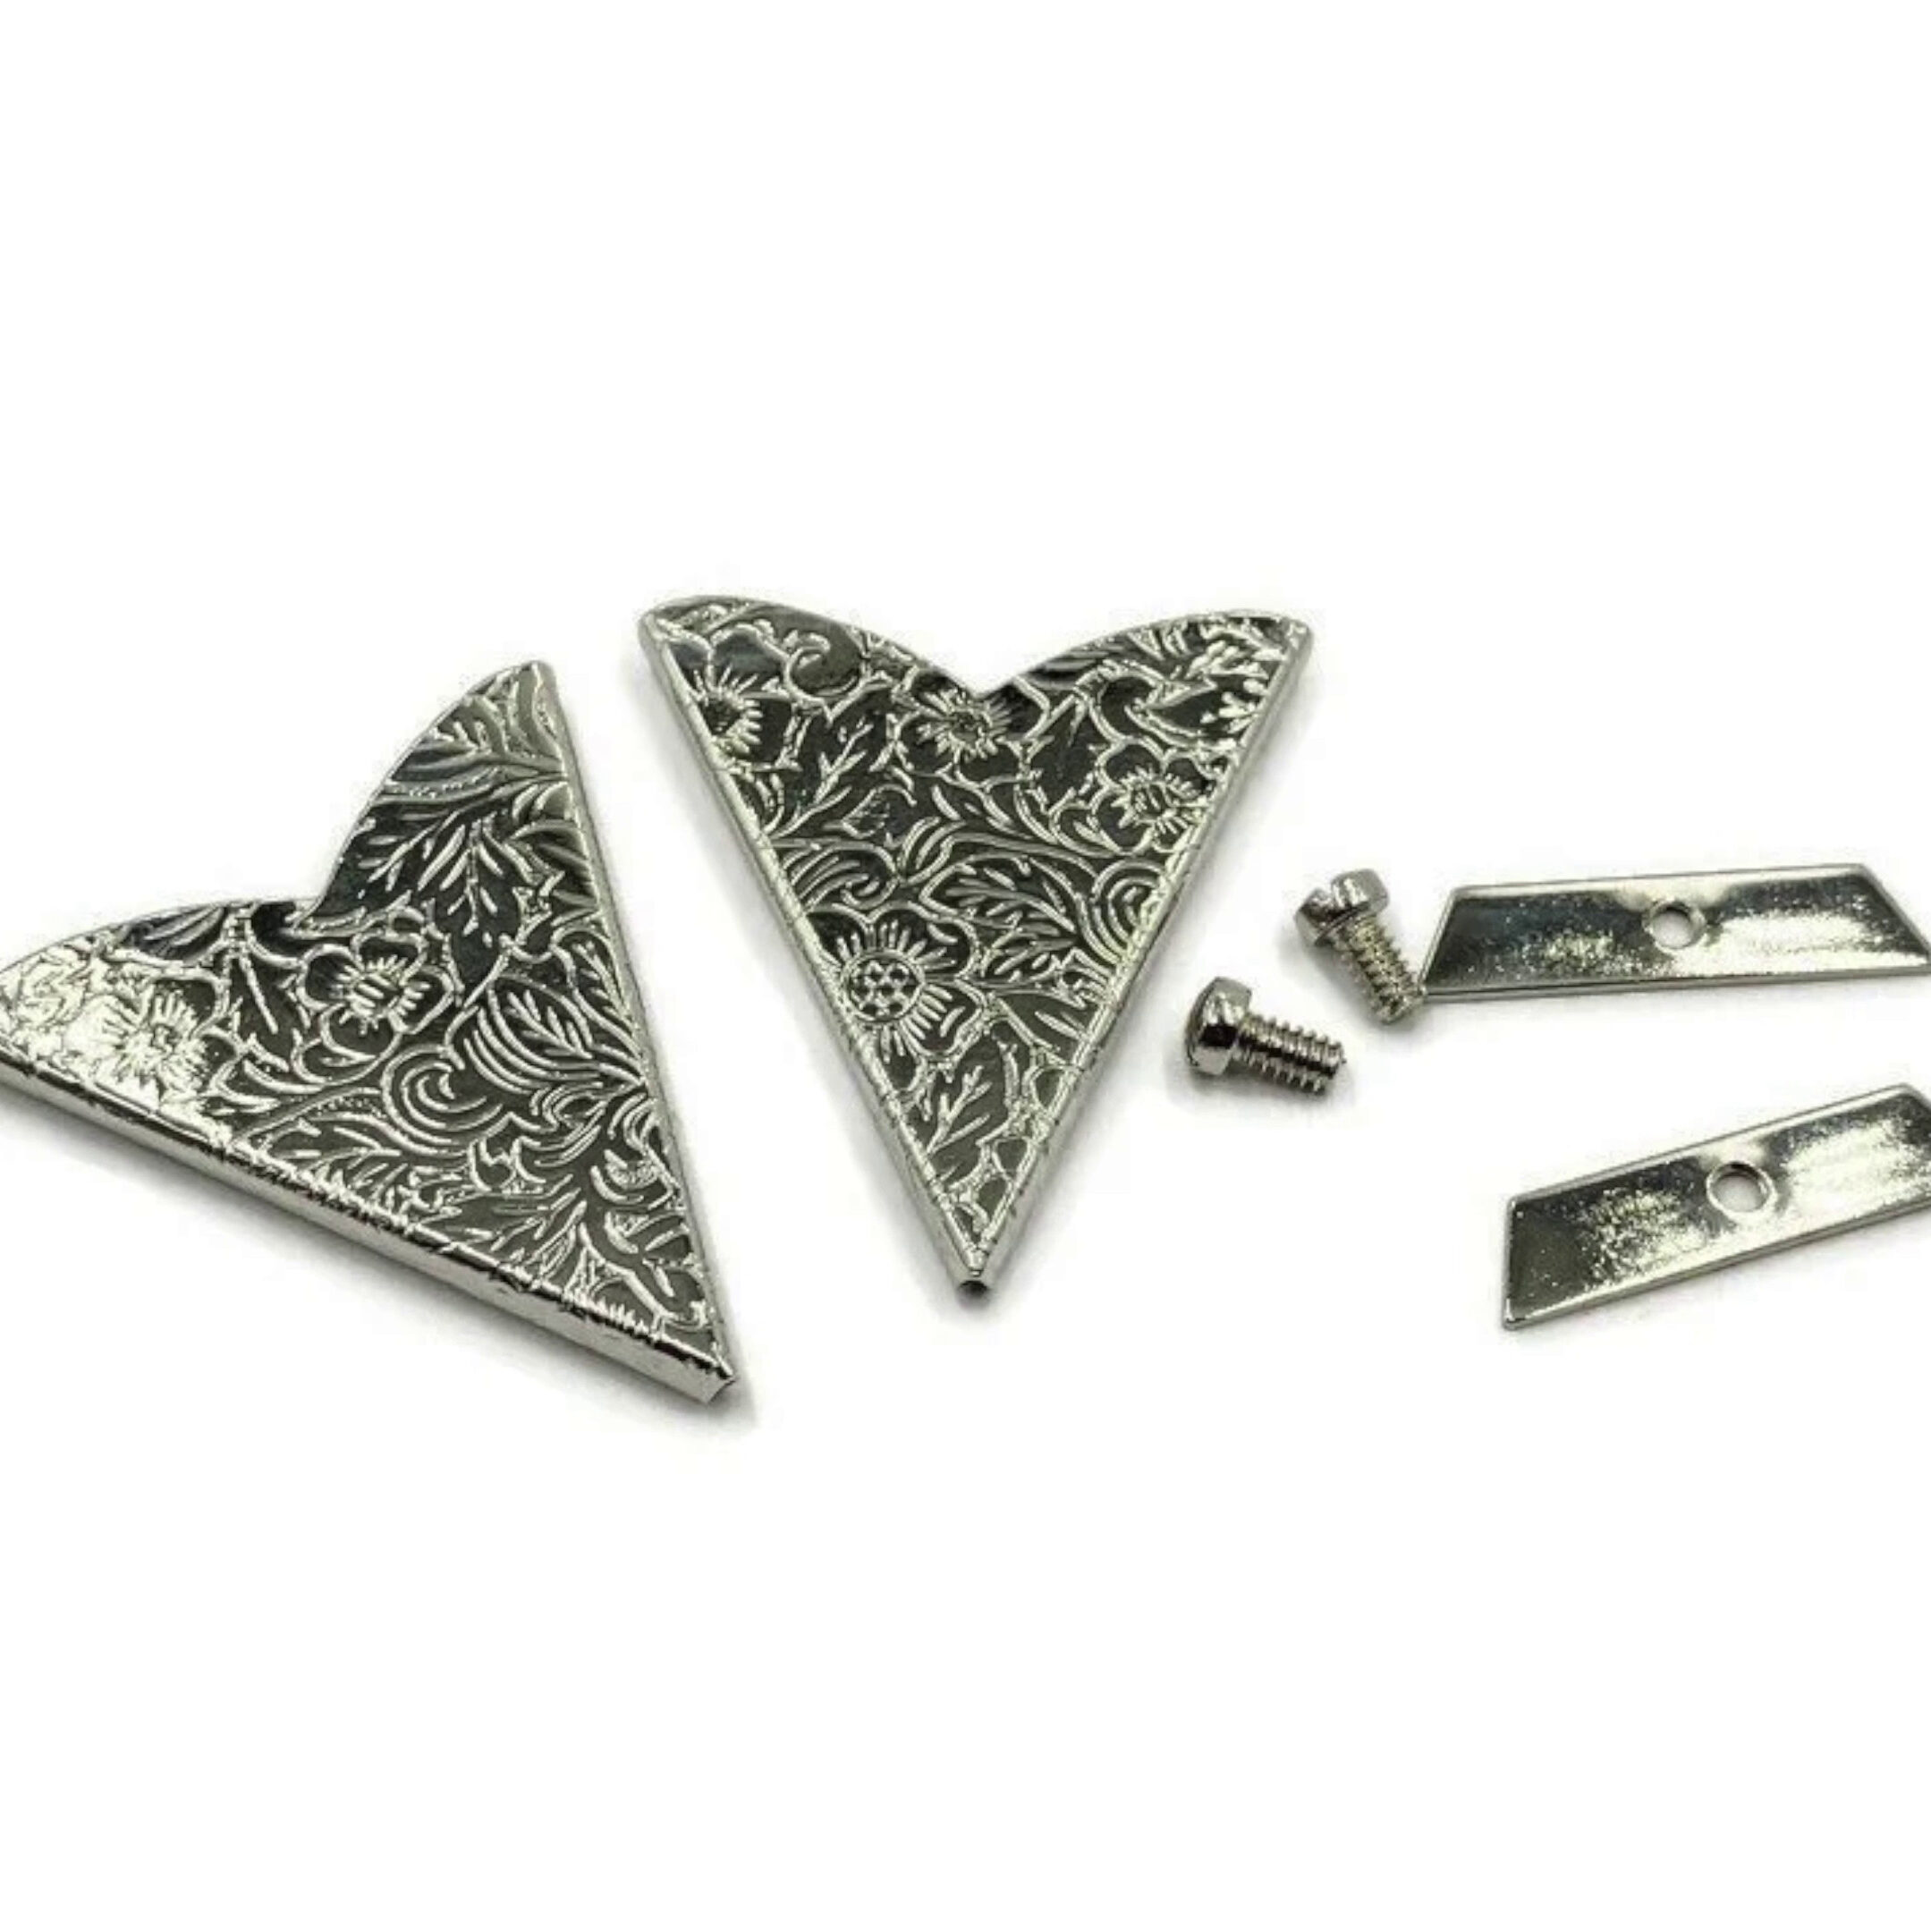 Decorative metal Collar Tips for western and rockabilly shirts made of silver and metal with cowboy motifs, stones, and filigrees.